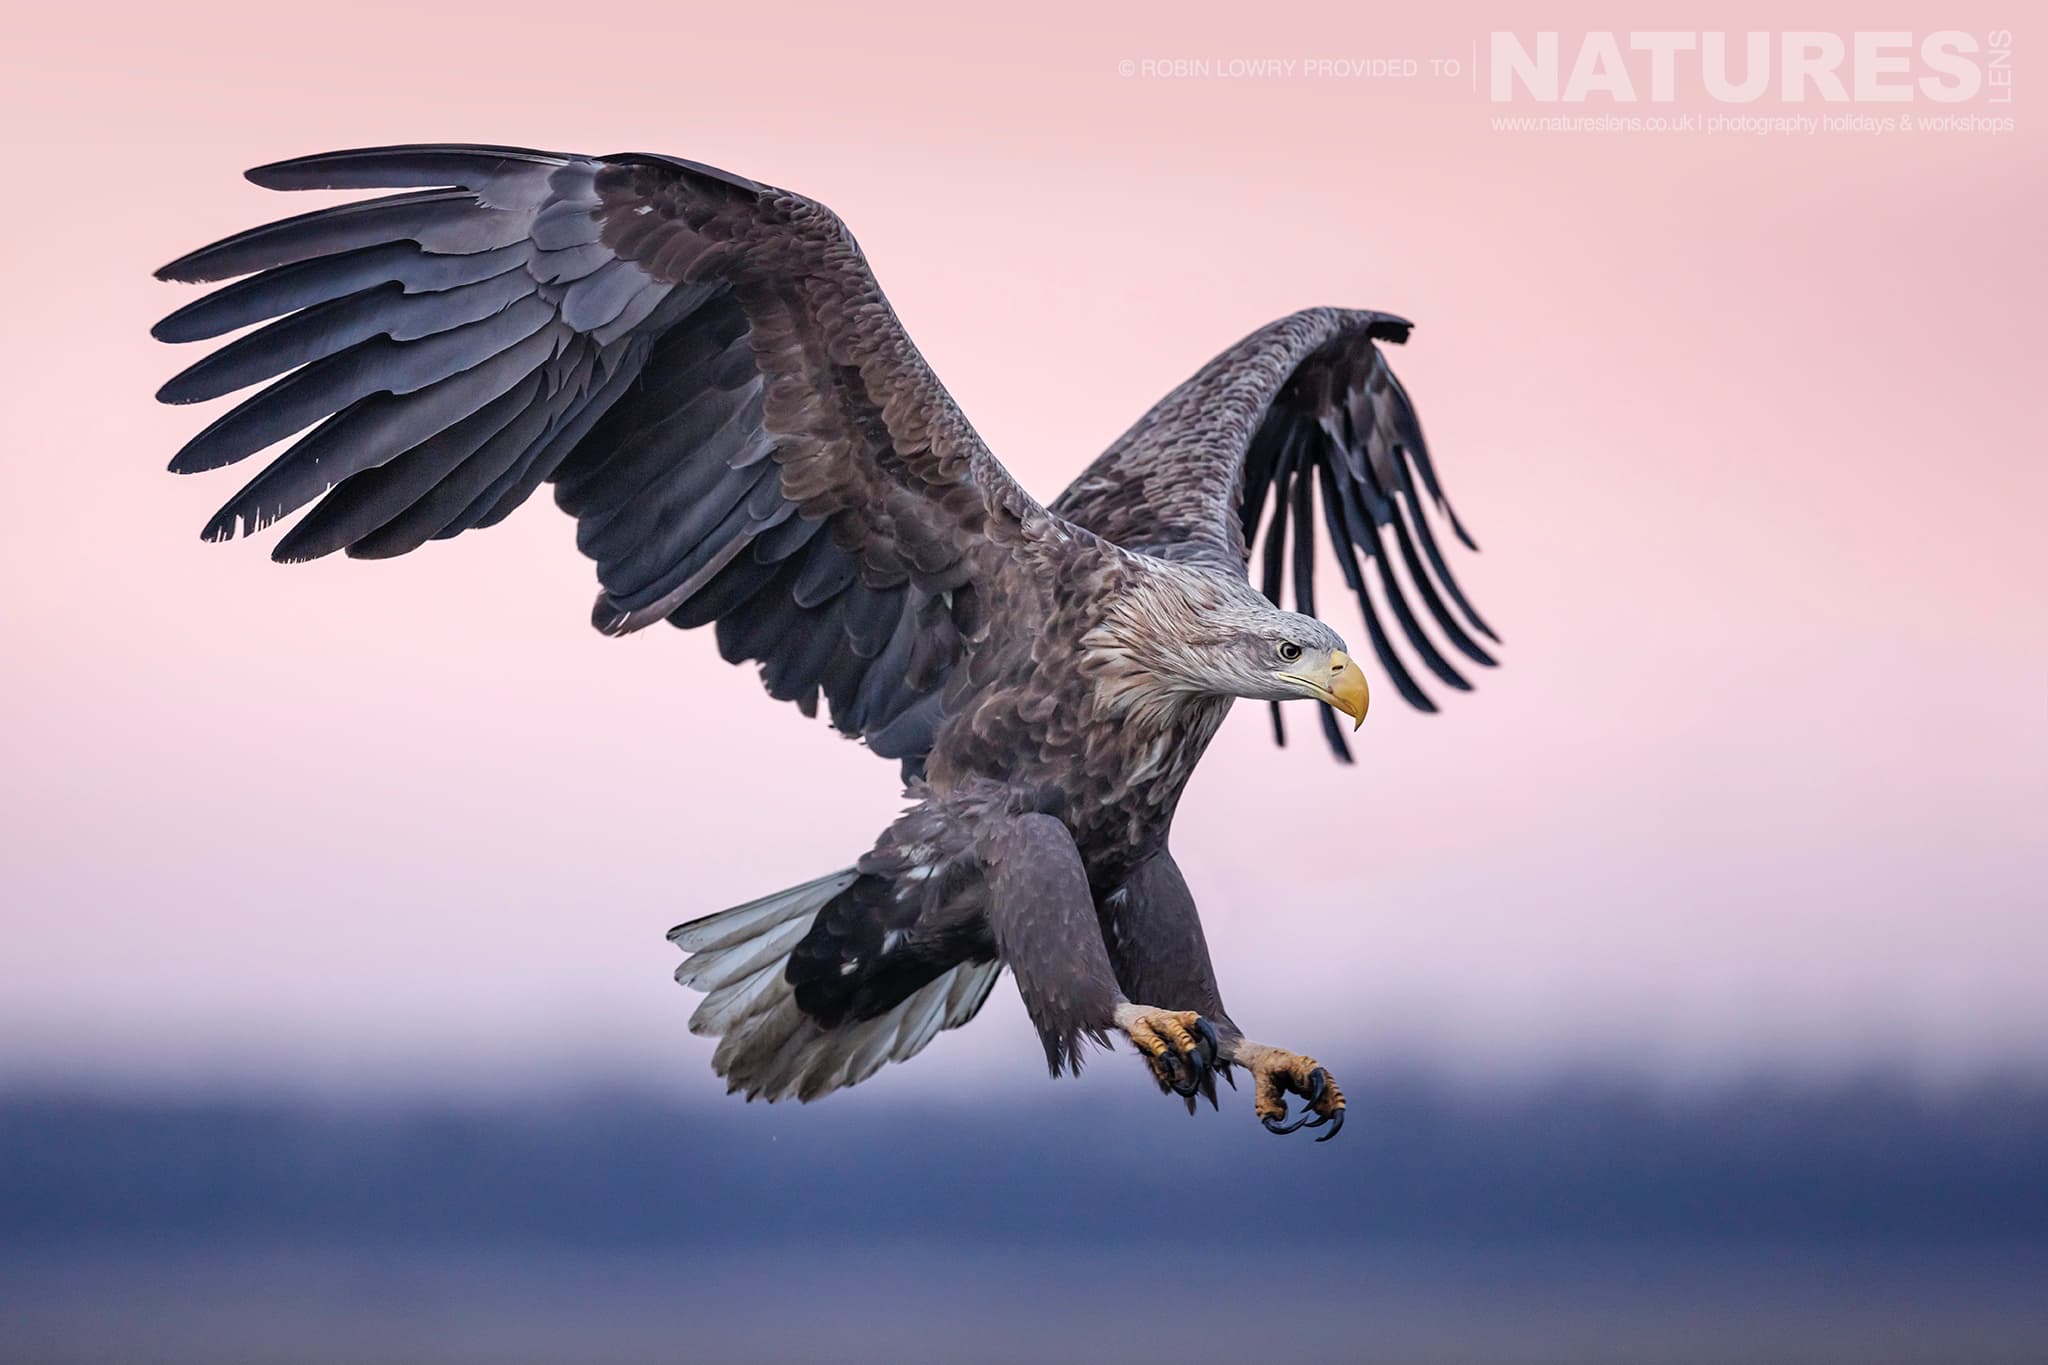 A White Tailed Eagle Comes In To Land Against A Pink Sky The Largest Bird Species Found Amongst The Wildlife Of The Hortobágy National Park In Hungary